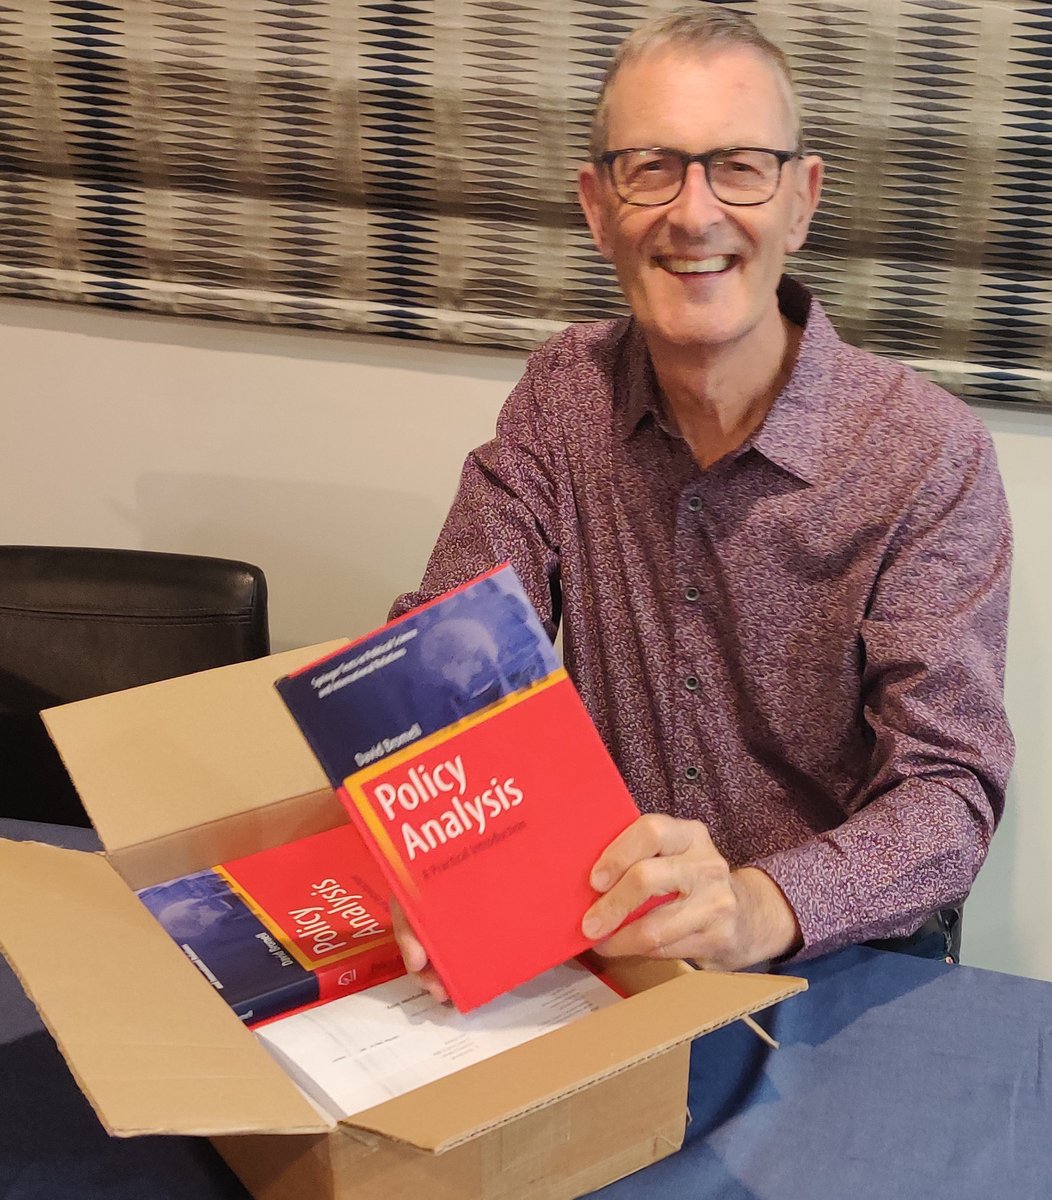 'Unboxing' a newly published book is always cause for celebration! This one's a practical introduction to policy analysis in Springer's texts in political science and international relations @SpringerNature #policyanalysis #publicpolicy